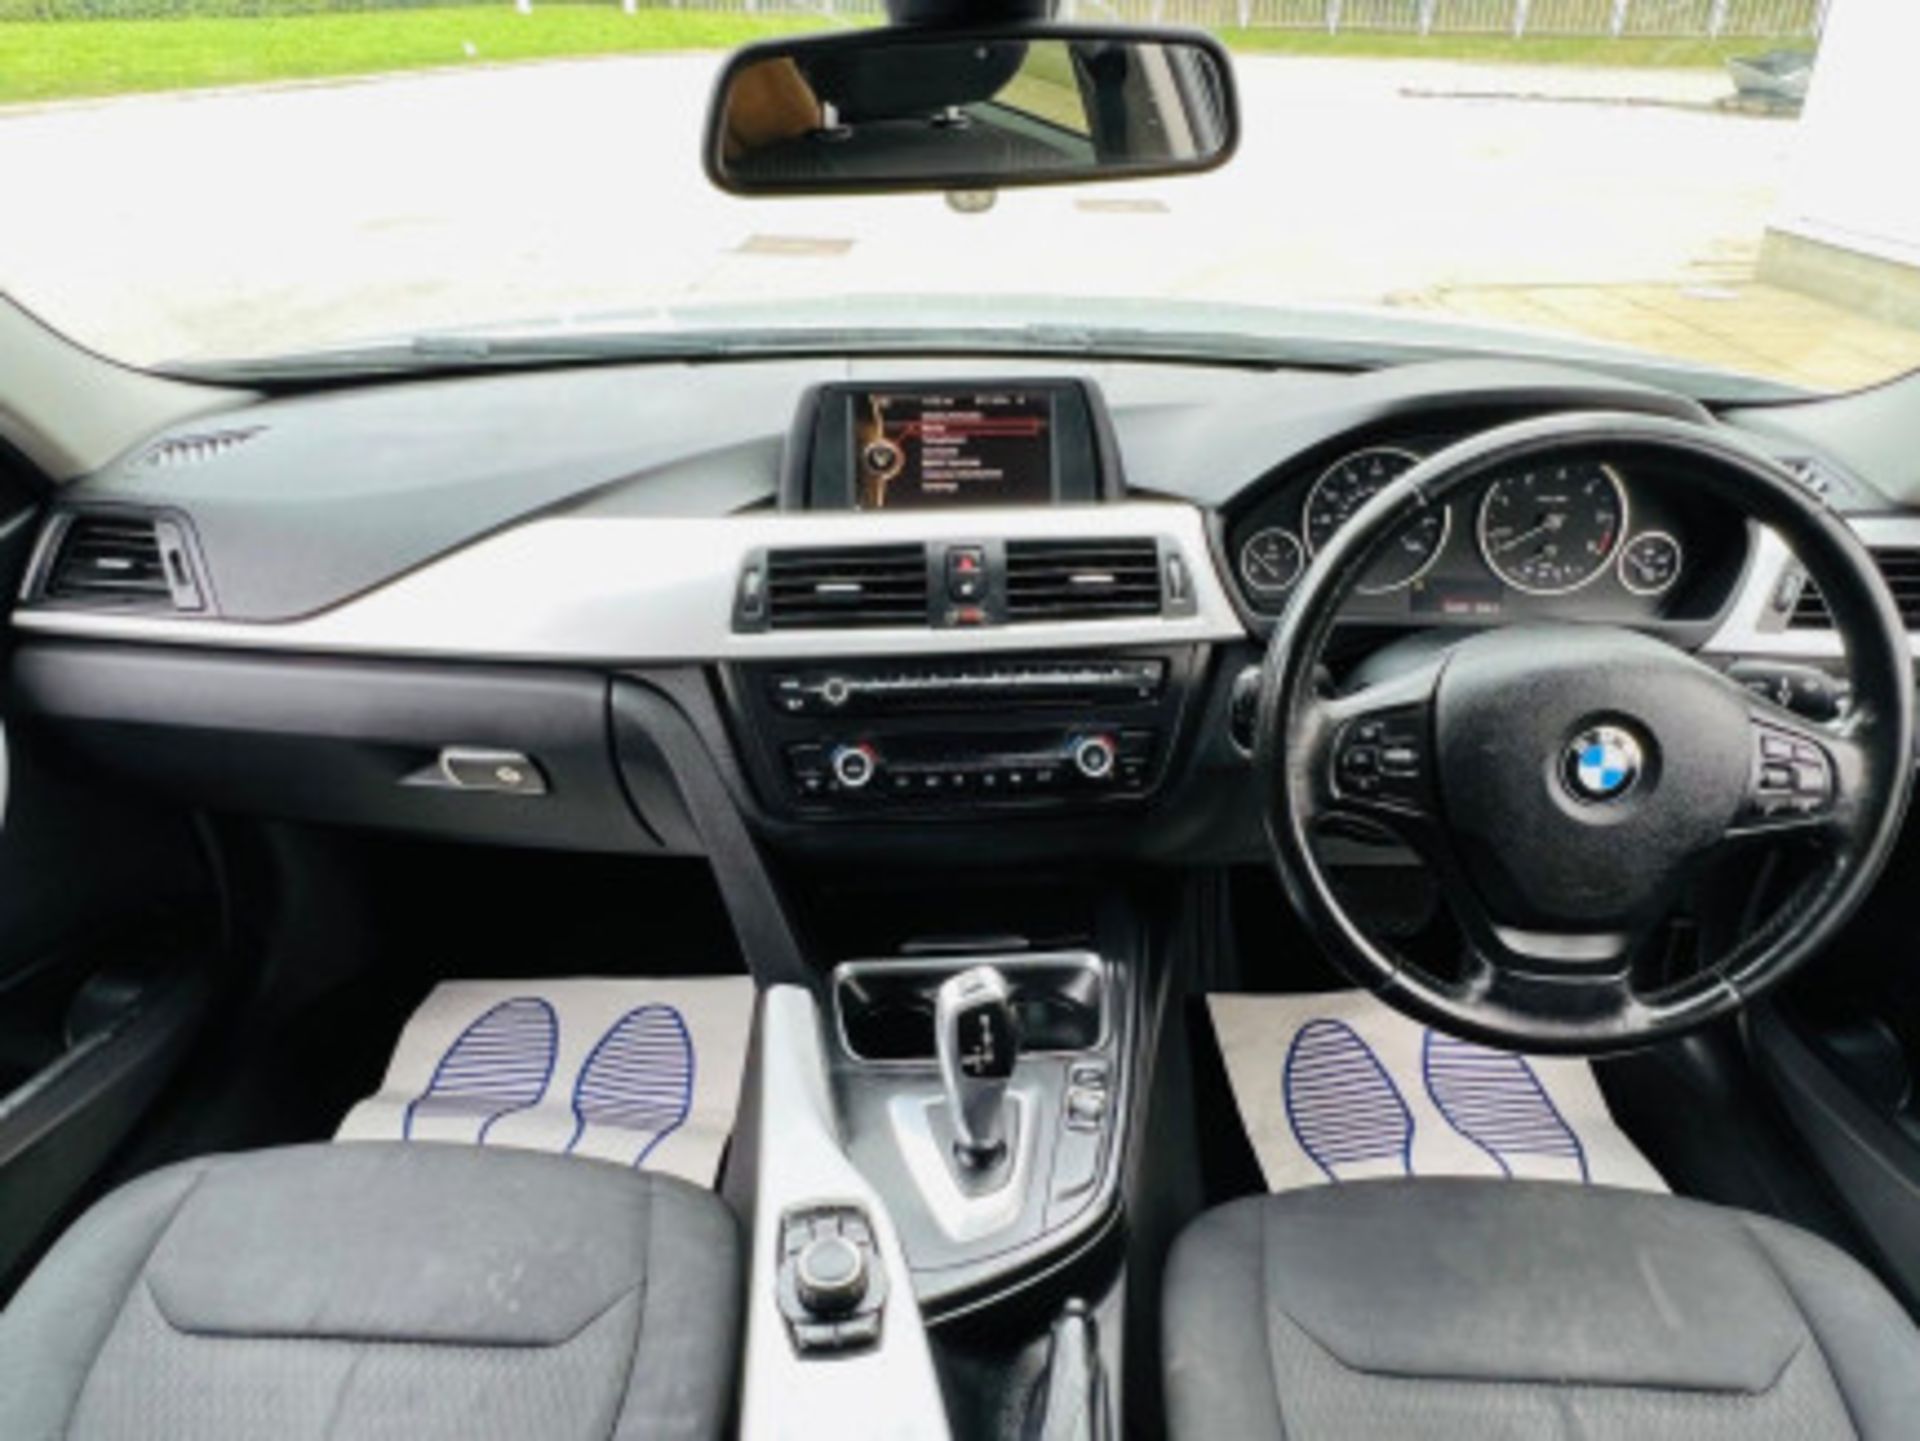 BMW 3 SERIES 2.0 DIESEL ED START STOP - A WELL-MAINTAINED GEM >>--NO VAT ON HAMMER--<< - Image 44 of 229